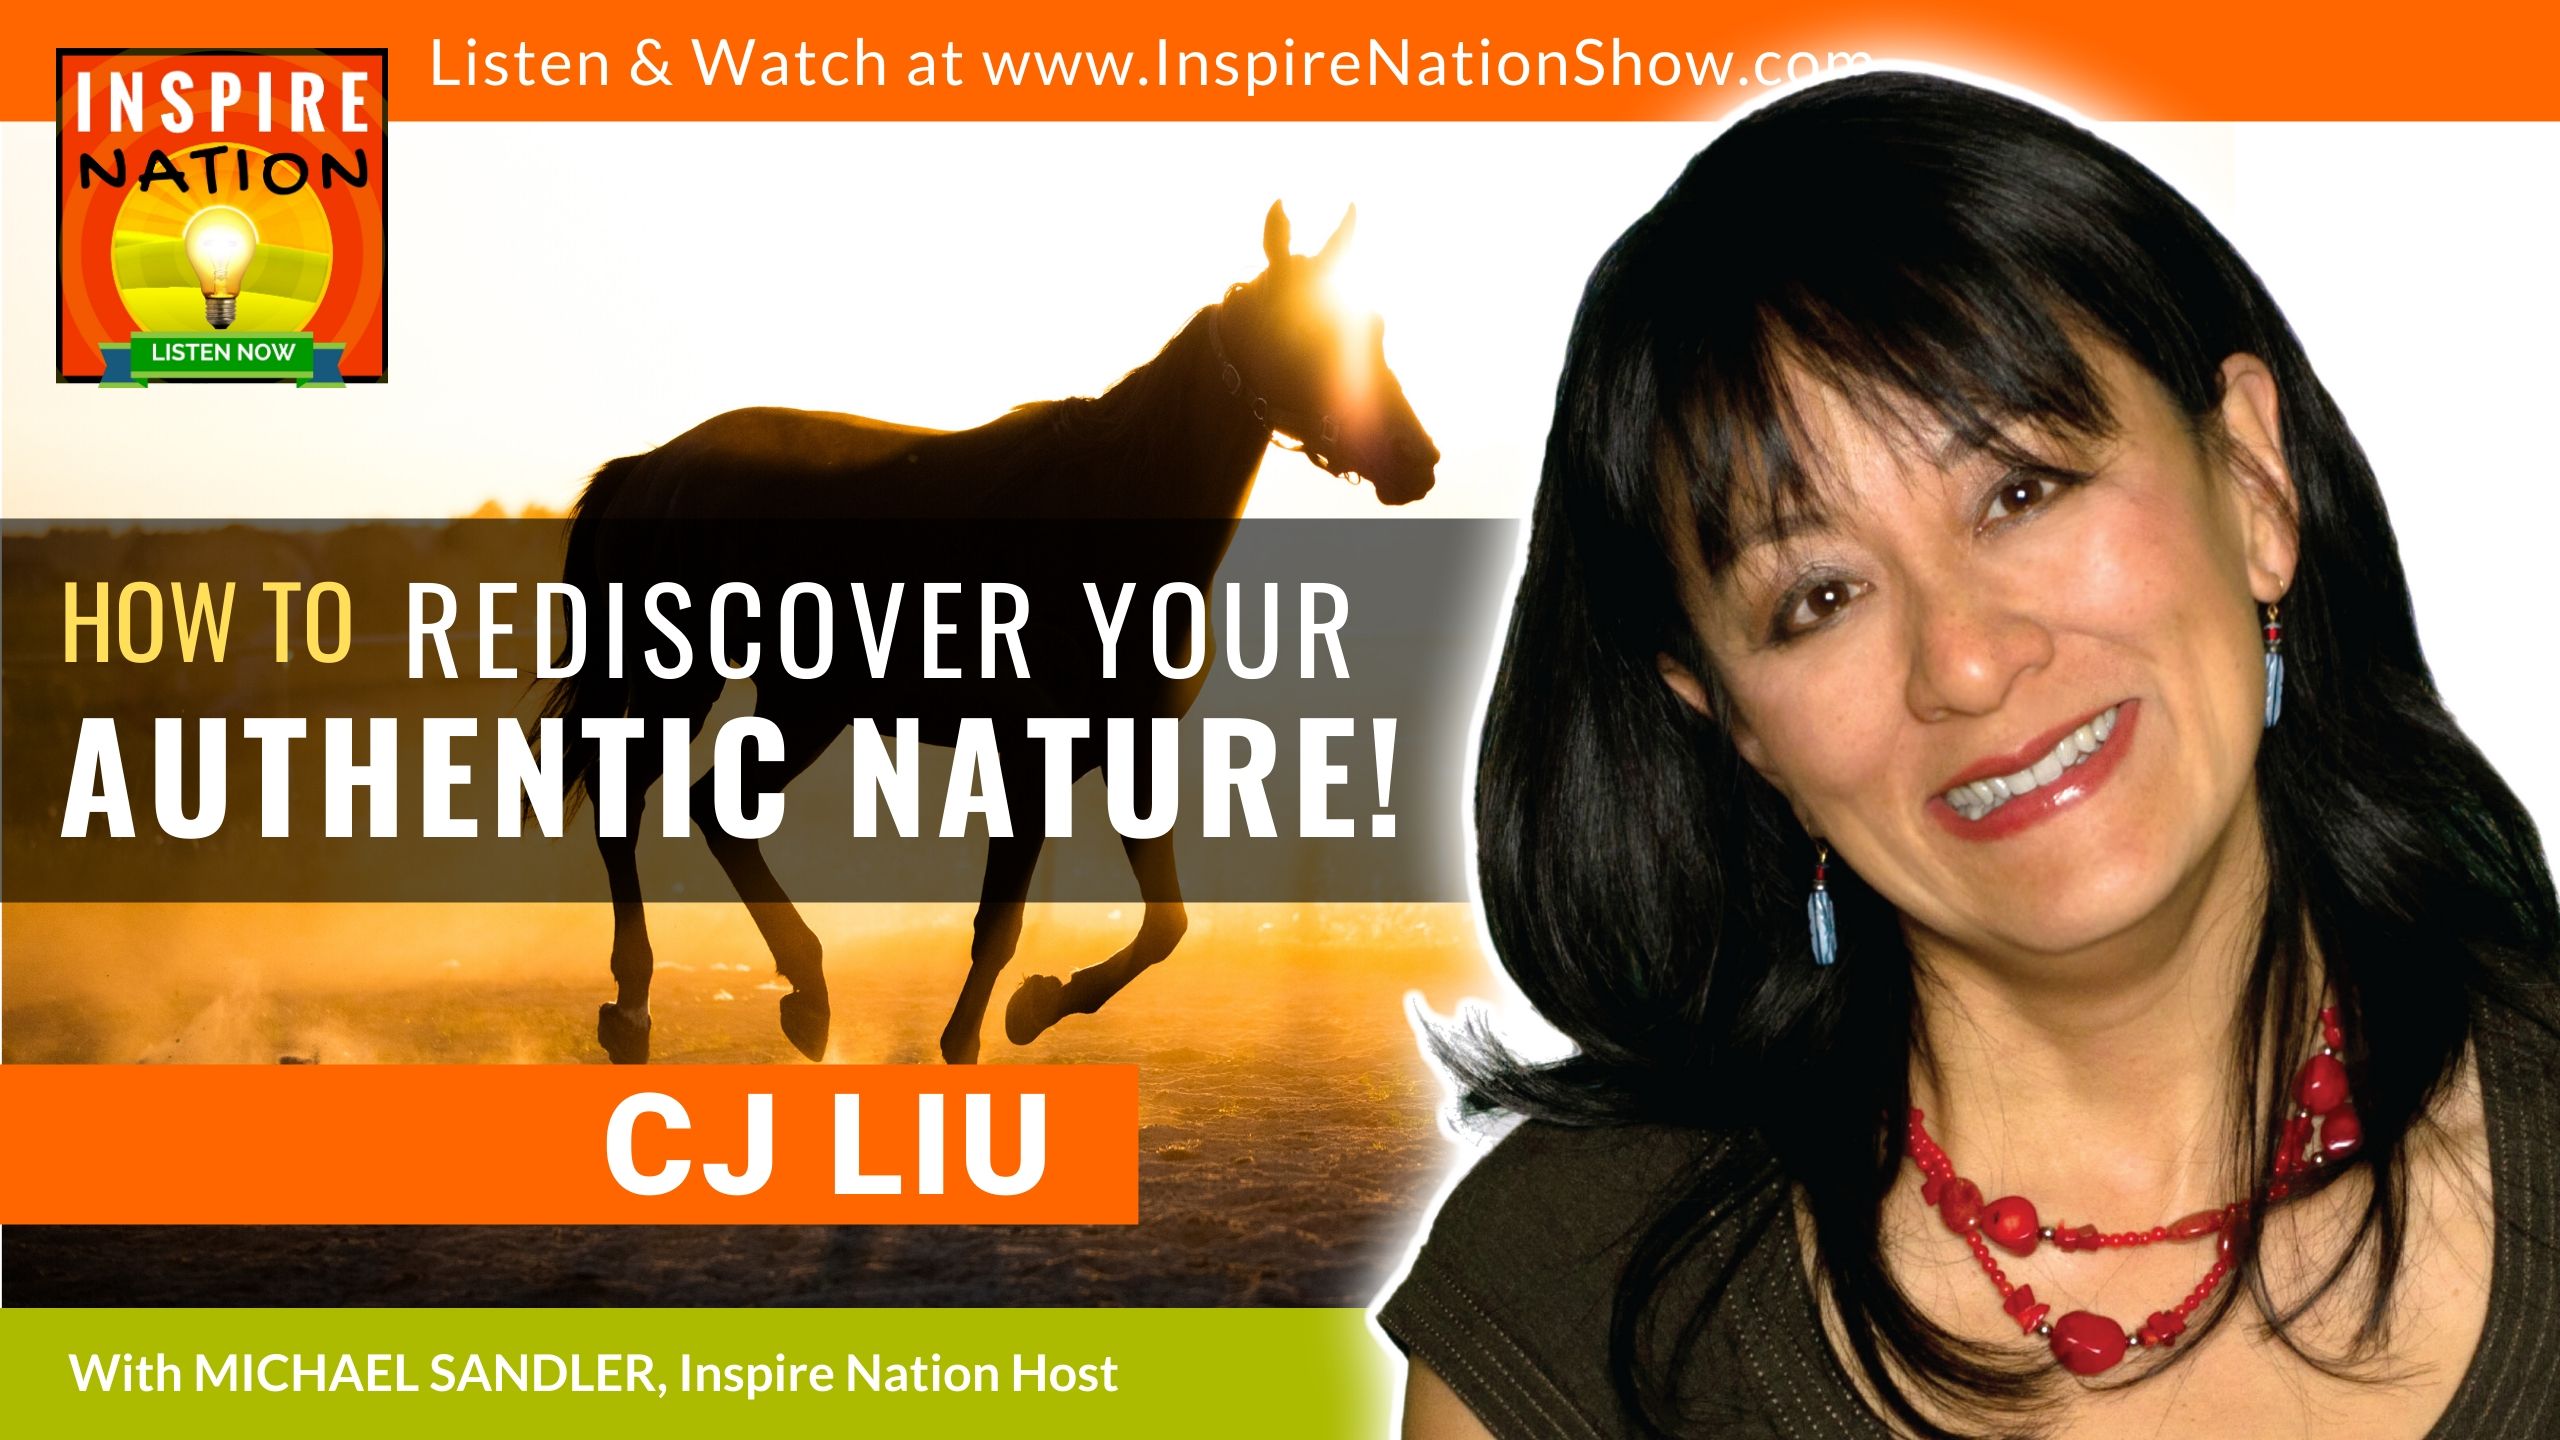 Michael Sandler and CJ Liu chat about rediscovering your authentic nature!